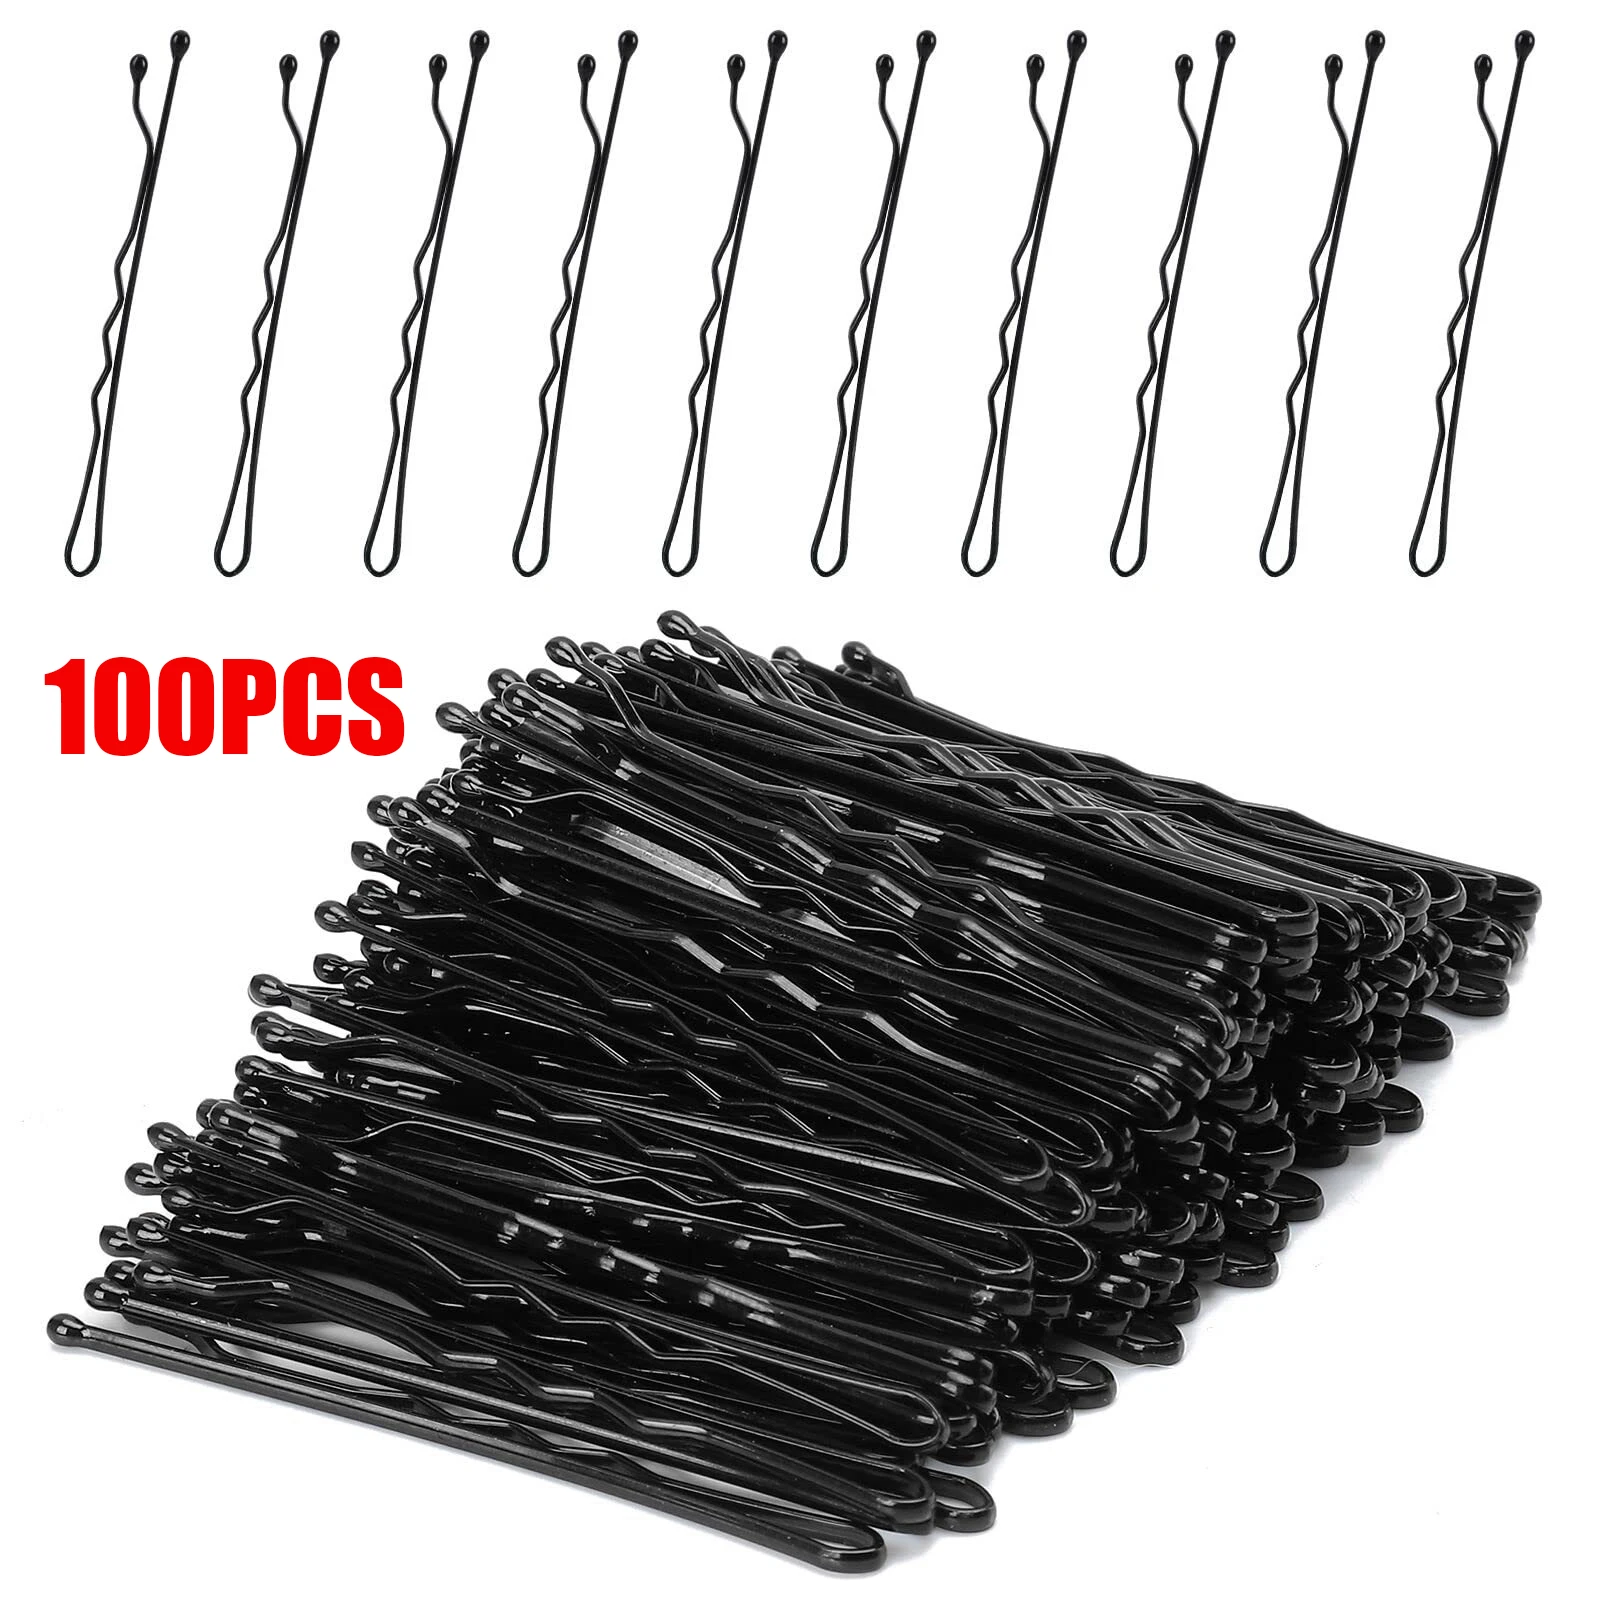 100PCS Brown Hair Pins black Hairpins Invisible Wave Hairgrip Barrette Hairclip Bulk Hair Accessories for Women Lady Girls Kids 30pcs white black kraft paper jewelry gift box package holder storage for earring necklace accessories wedding wholesale bulk